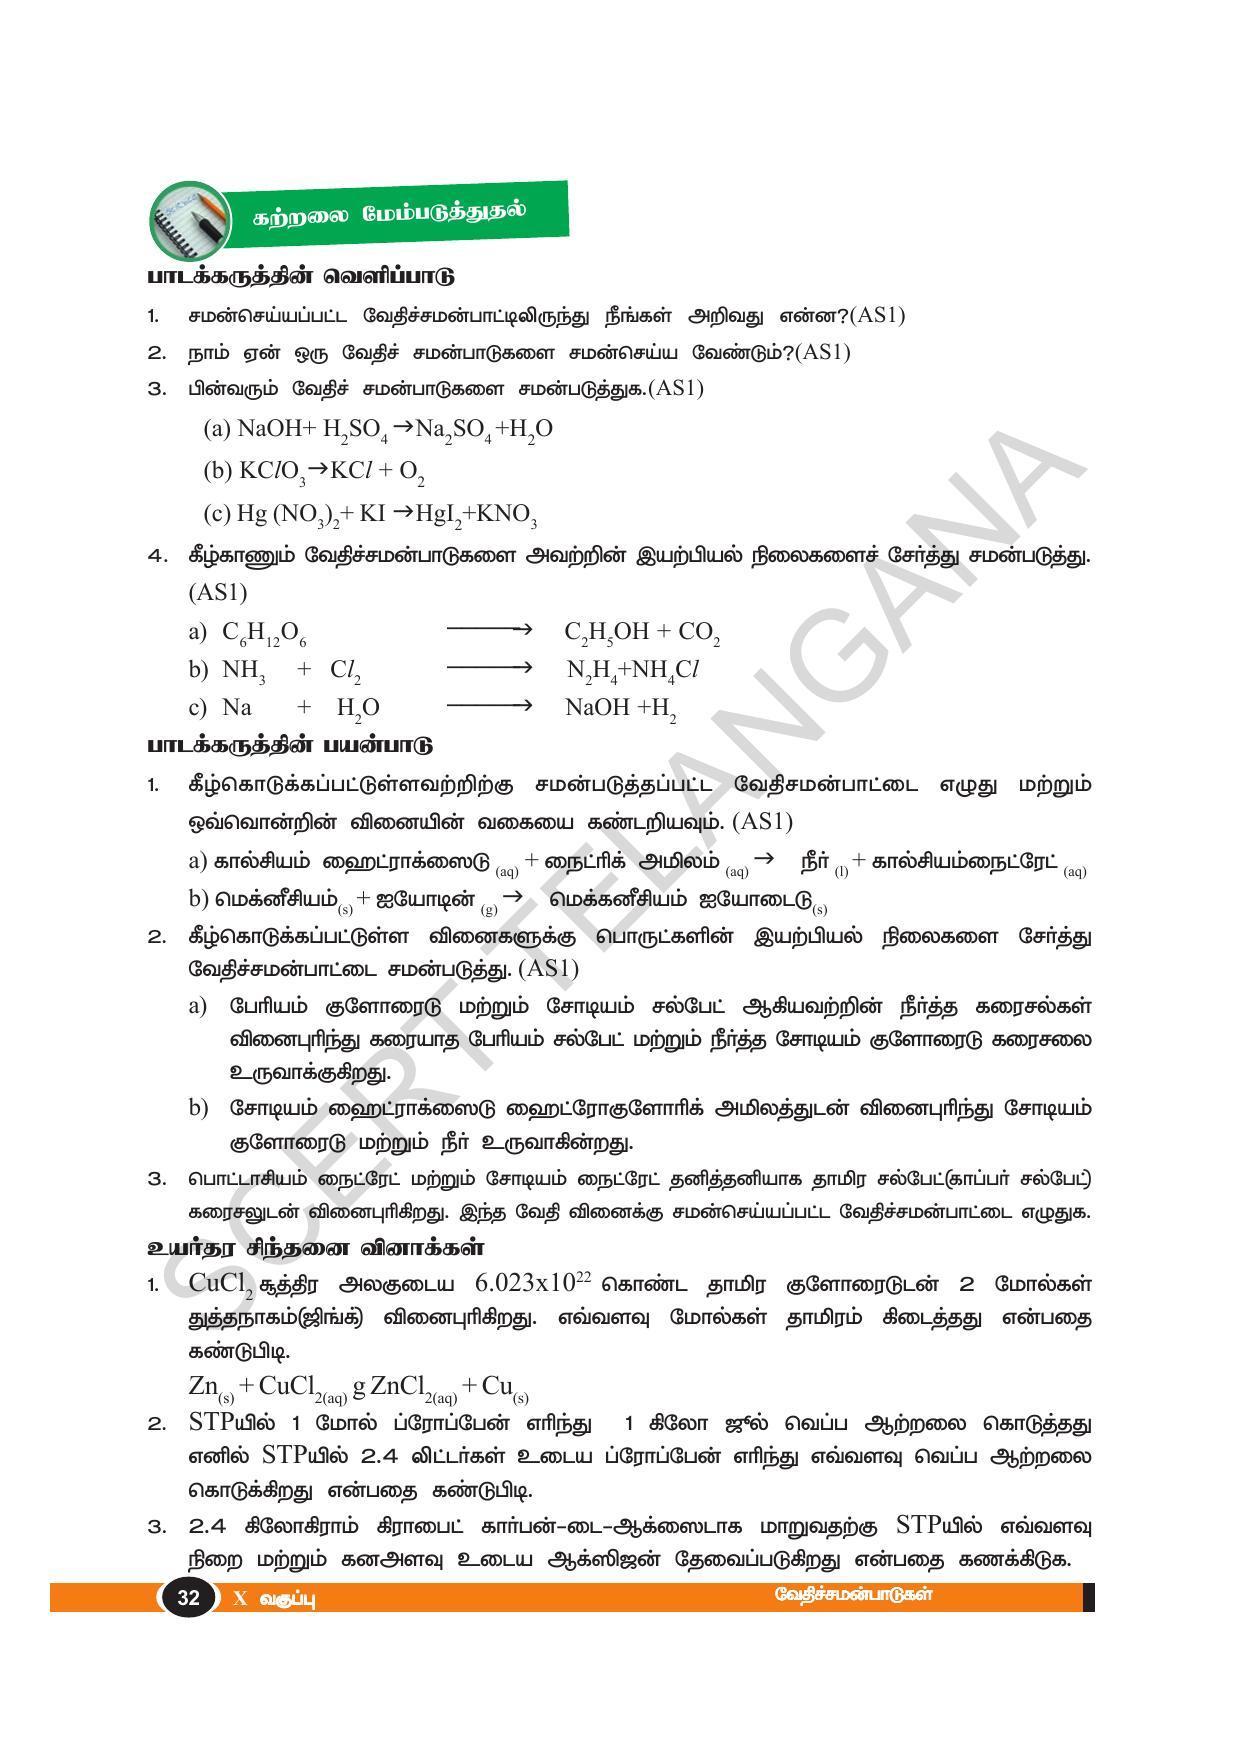 TS SCERT Class 10 Physical Science(Tamil Medium) Text Book - Page 44